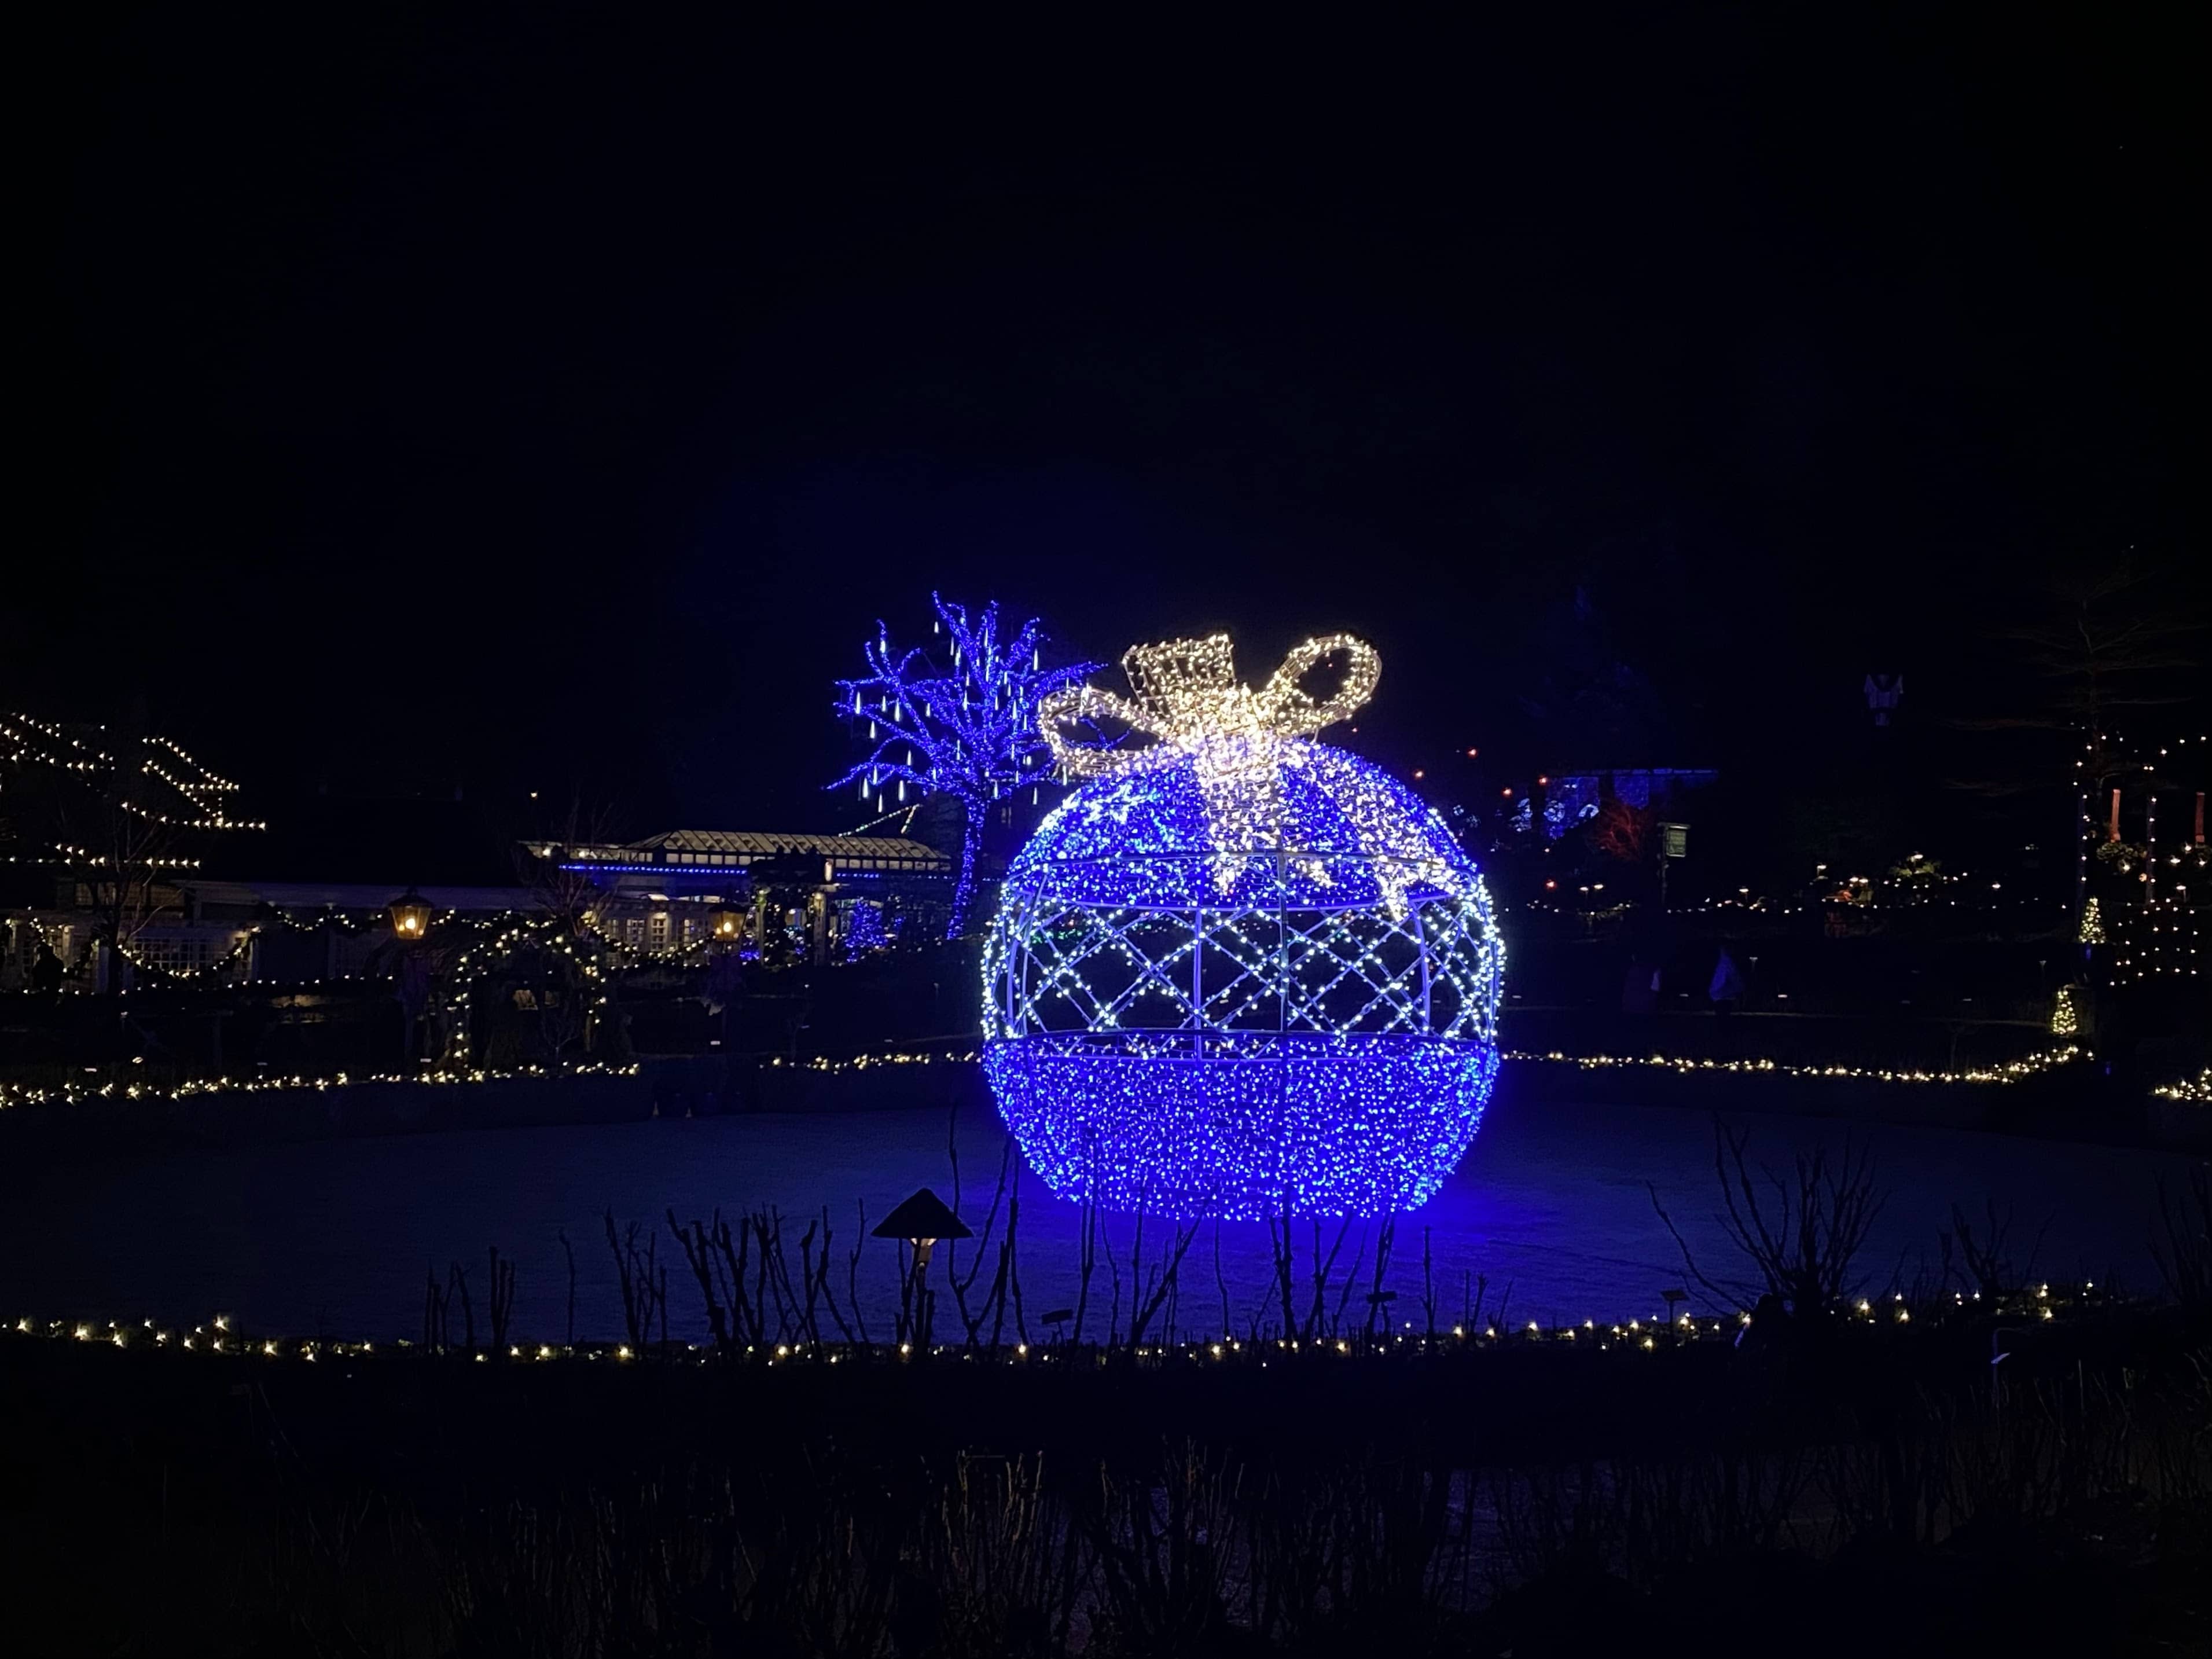 Another incredible light display (looks like a large Christmas decoration) at the Butchart Gardens.